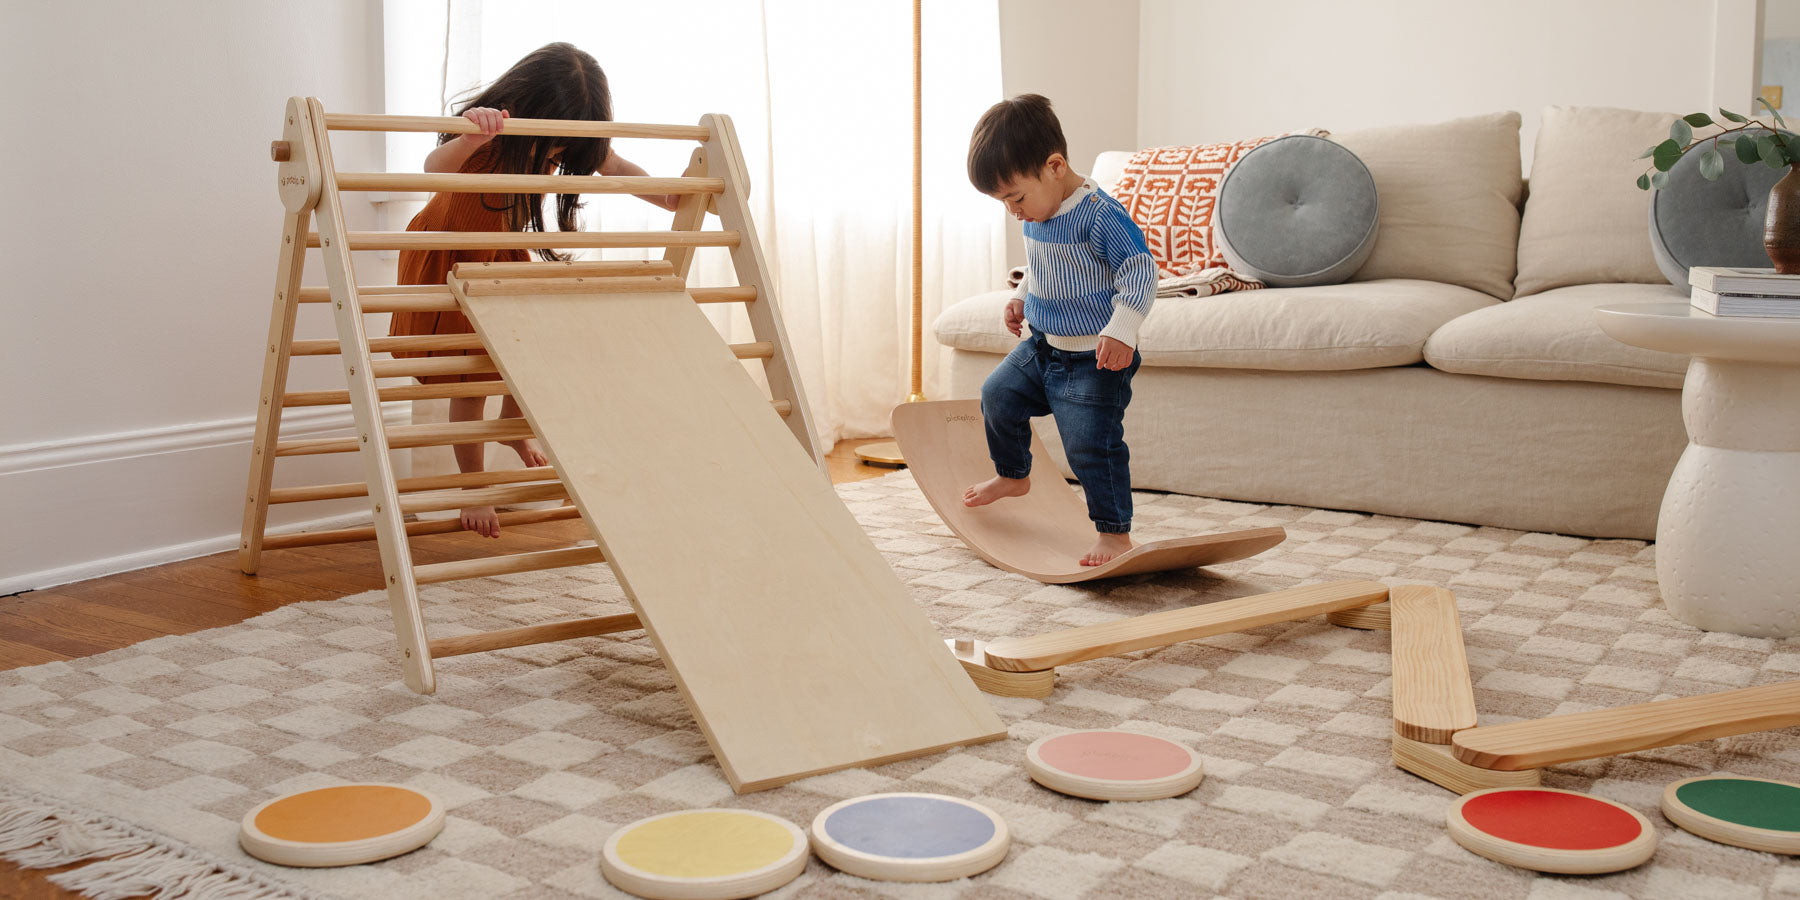 All Wooden Toys and Furniture by Piccalio Montessori Inspired